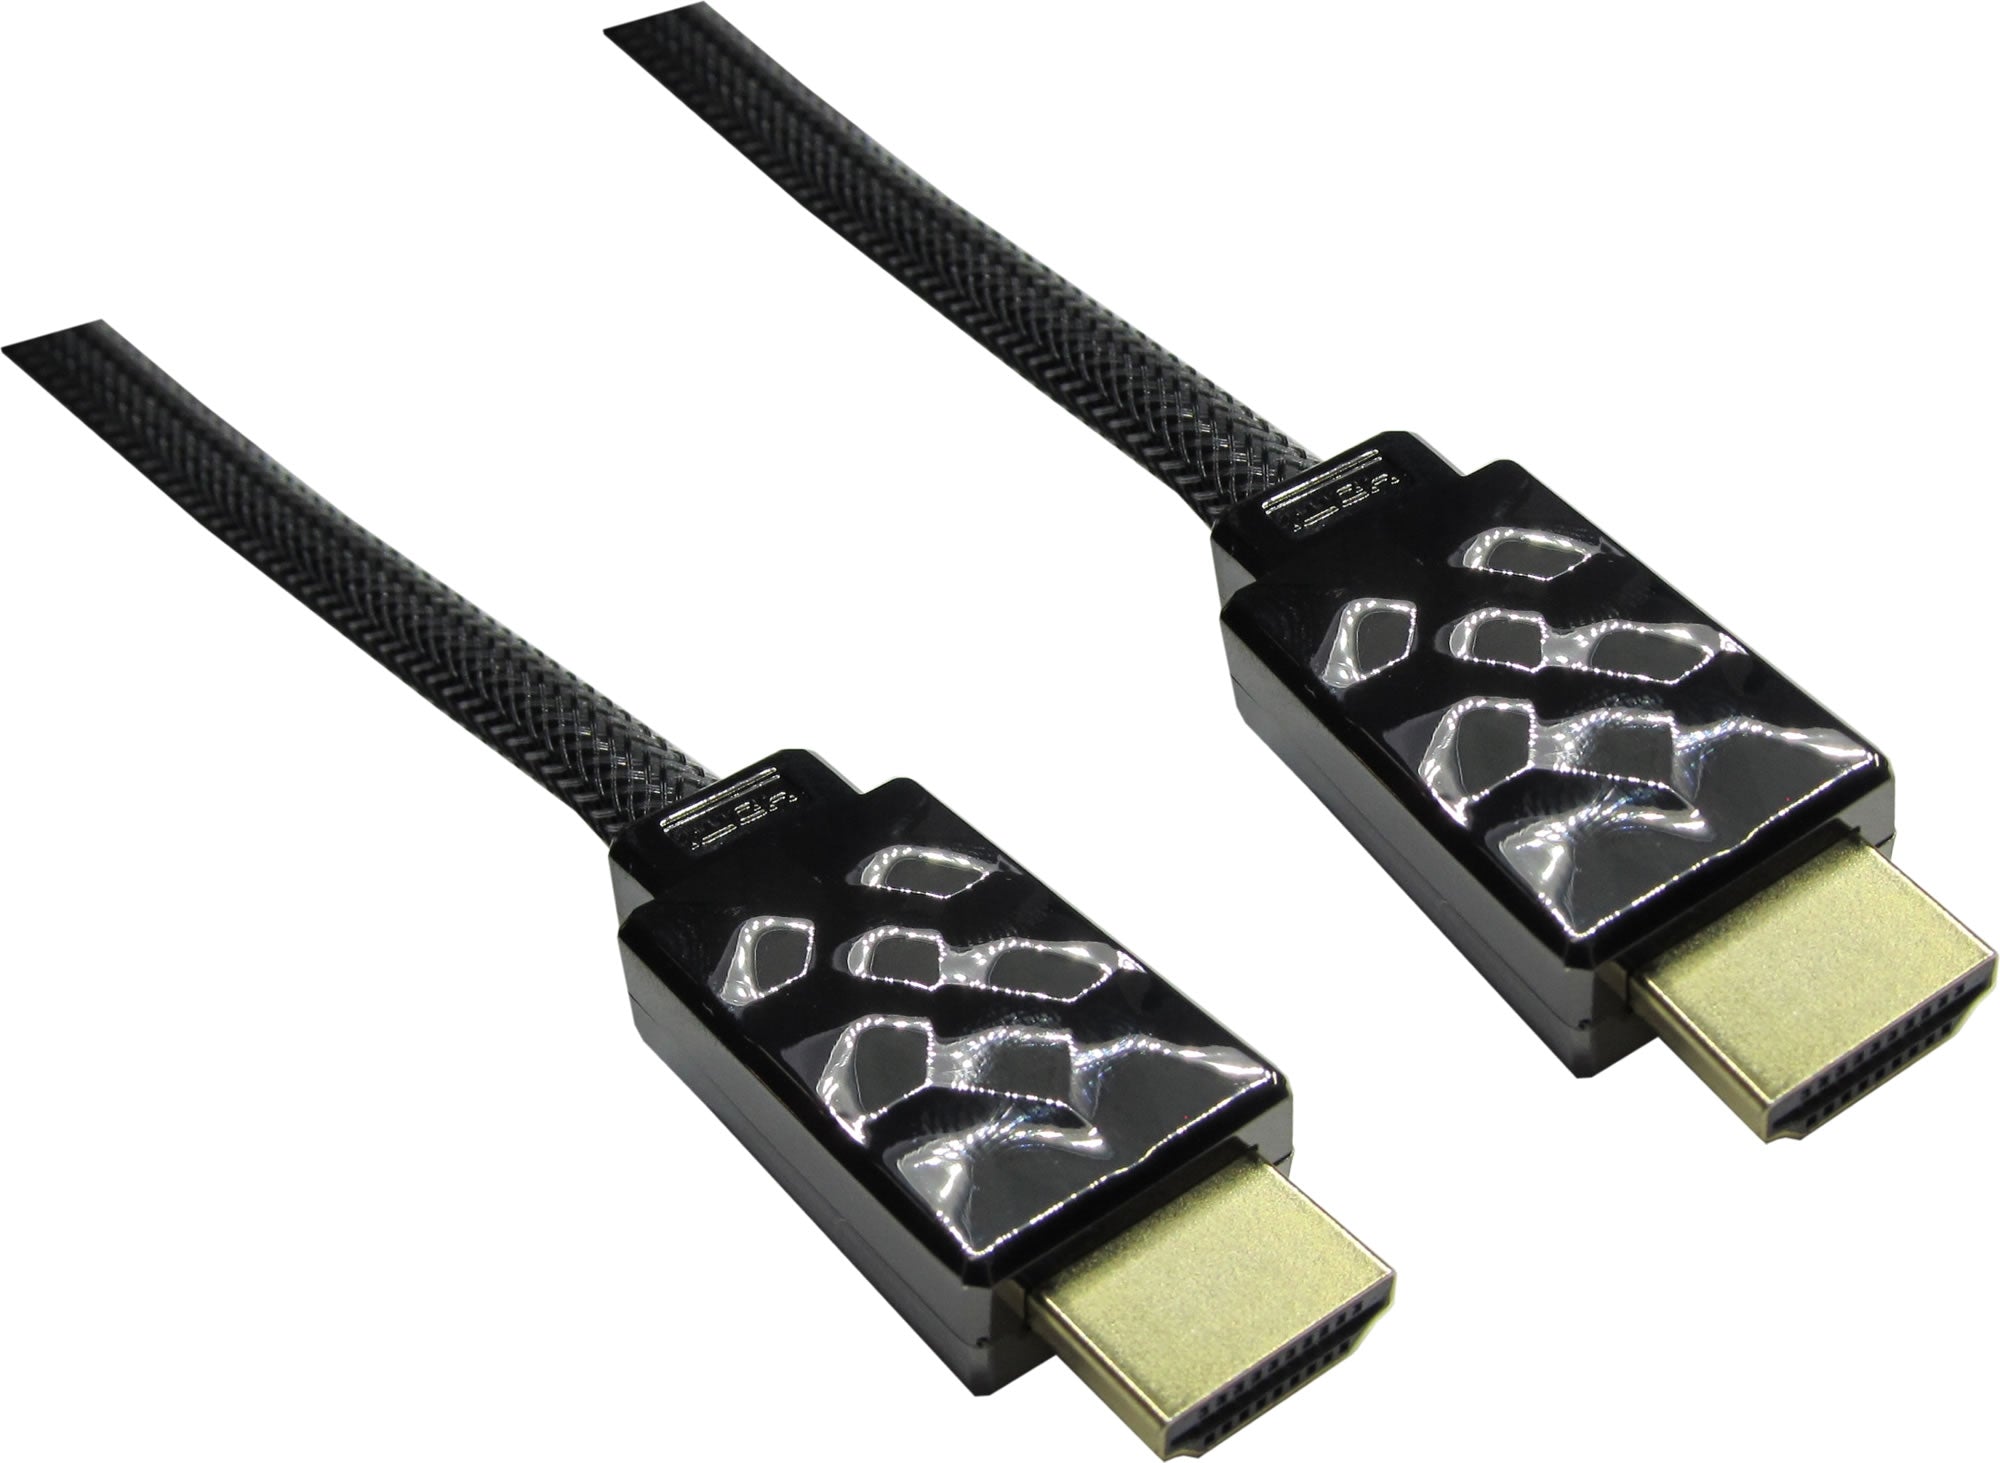 16-6321-06 HDMI High Speed Cable 4K 3D HDMI Cable version 1.4 - 6 Ft